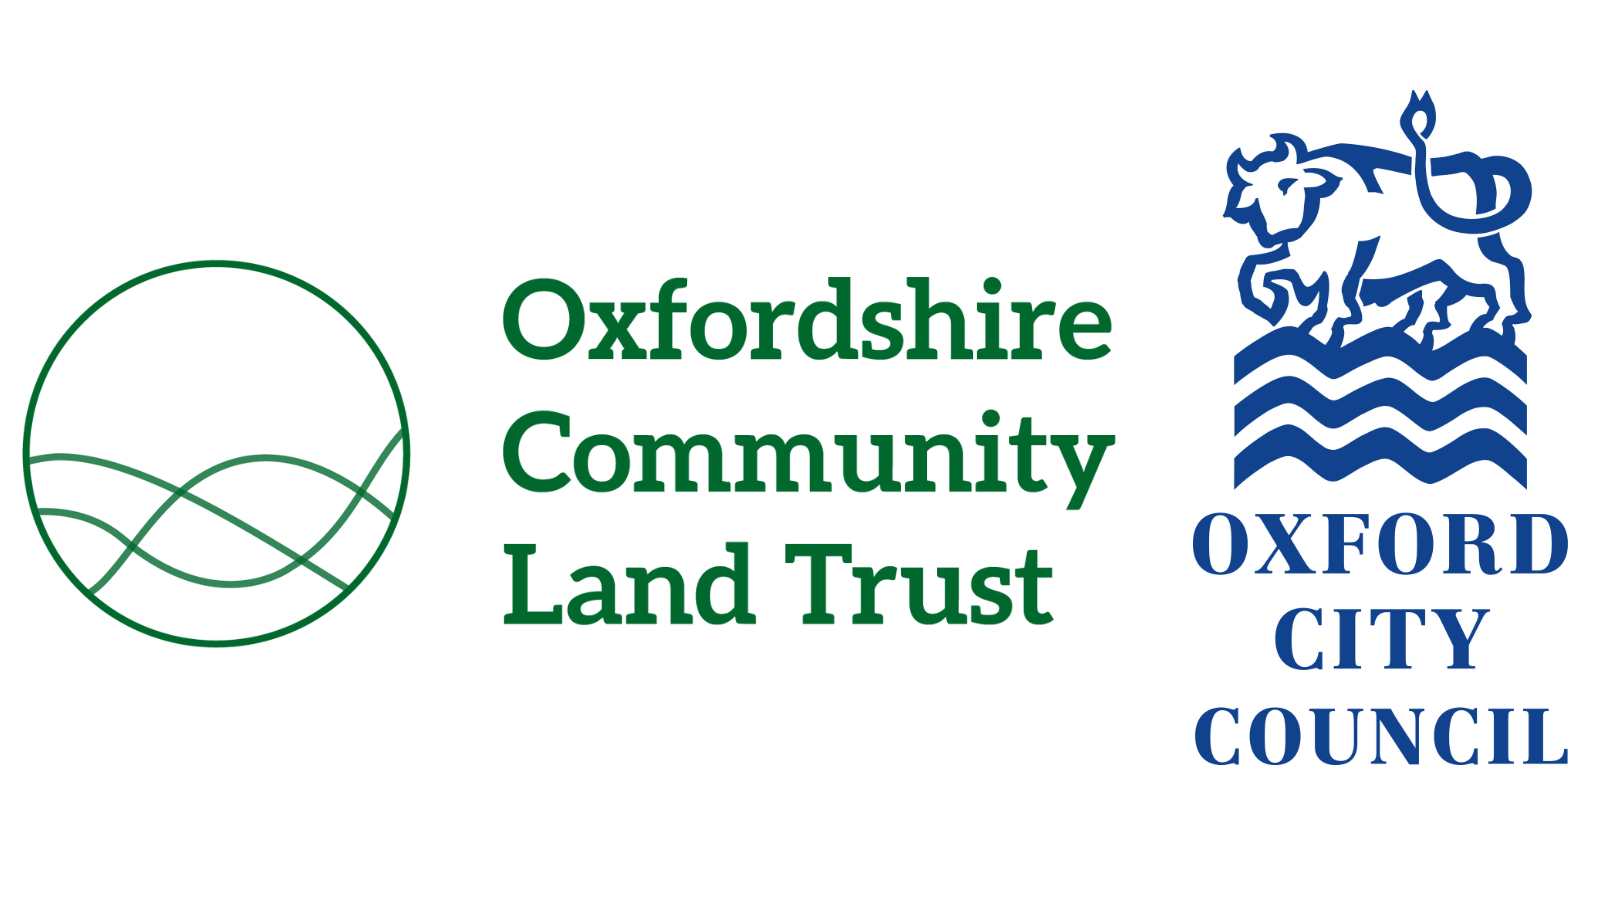 Logos of Oxfordshire Community land Trust and Oxford City Council